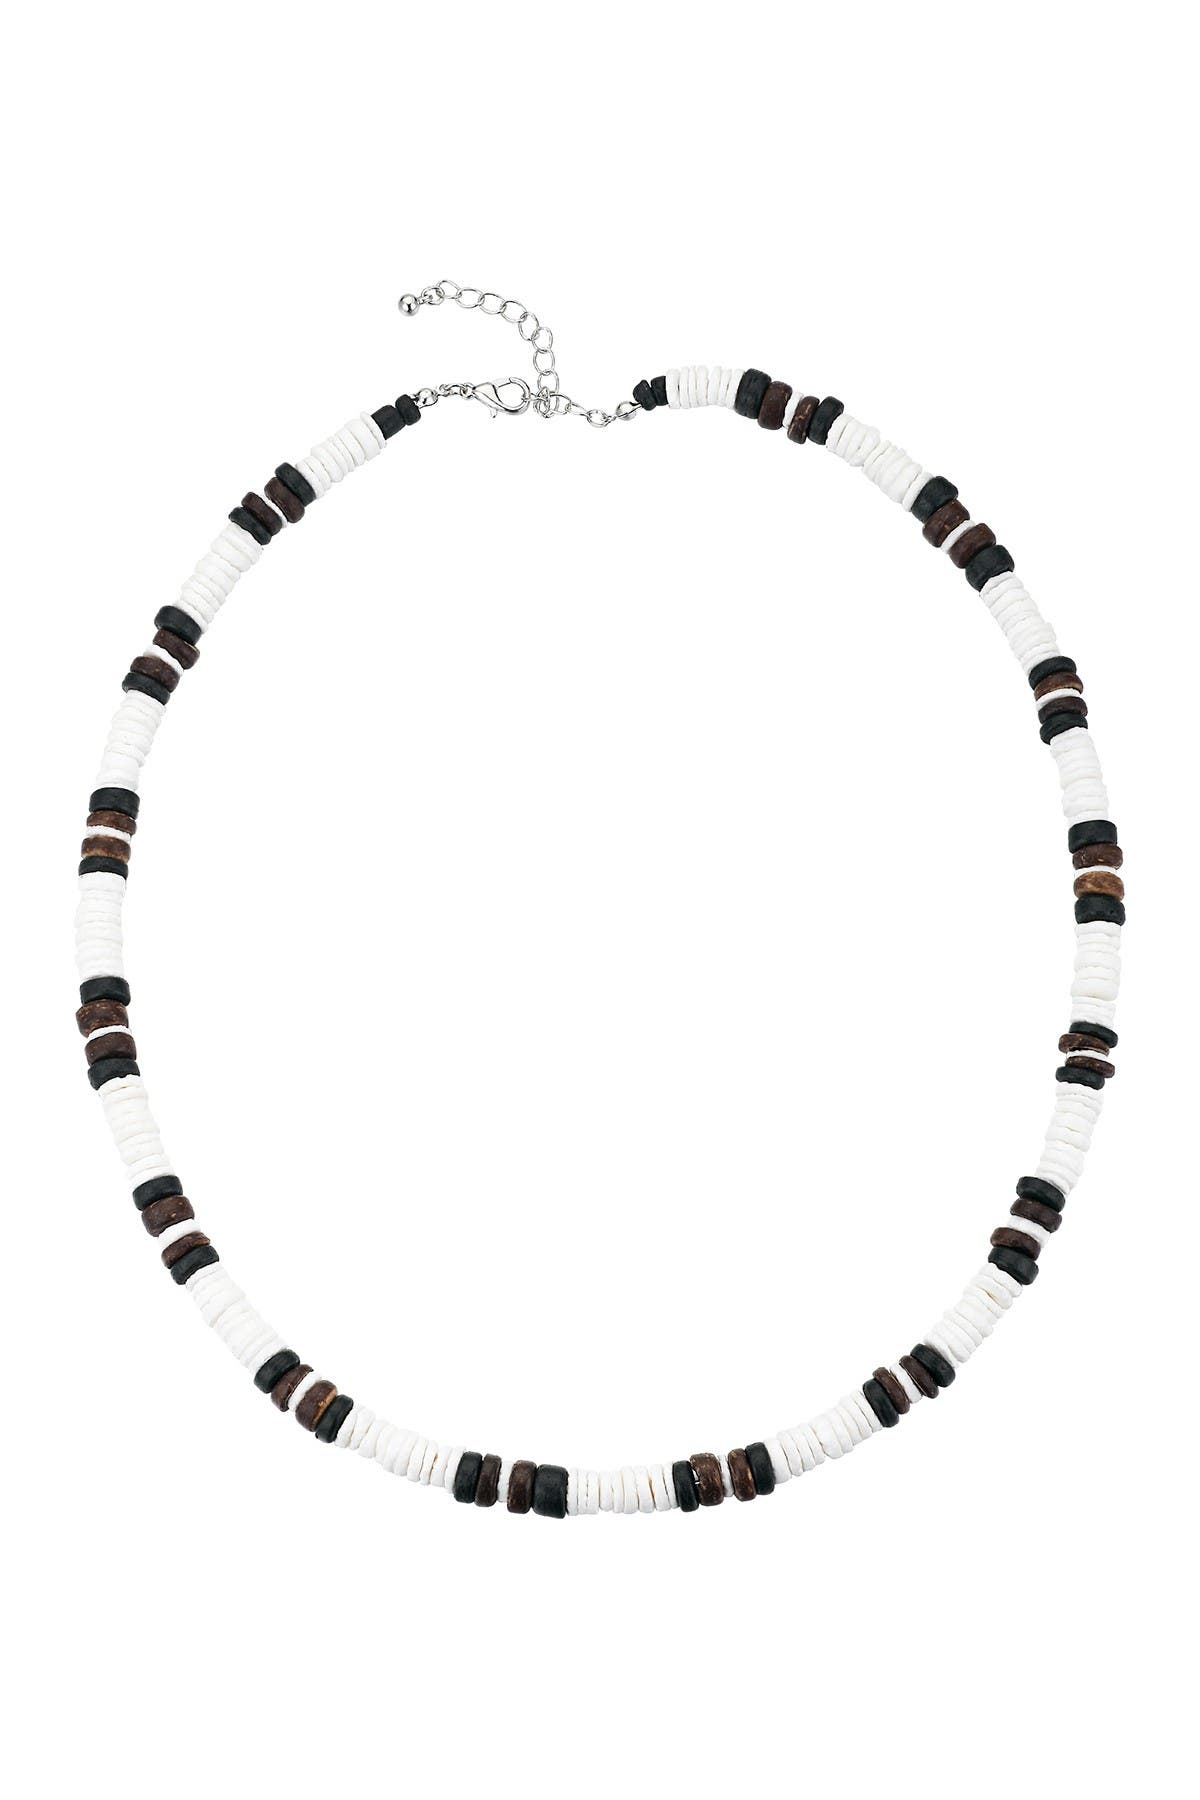 La Rocks Mixed Puka Shell & Black/brown Wood Bead Necklace In Mixed Shell Stainless Steel